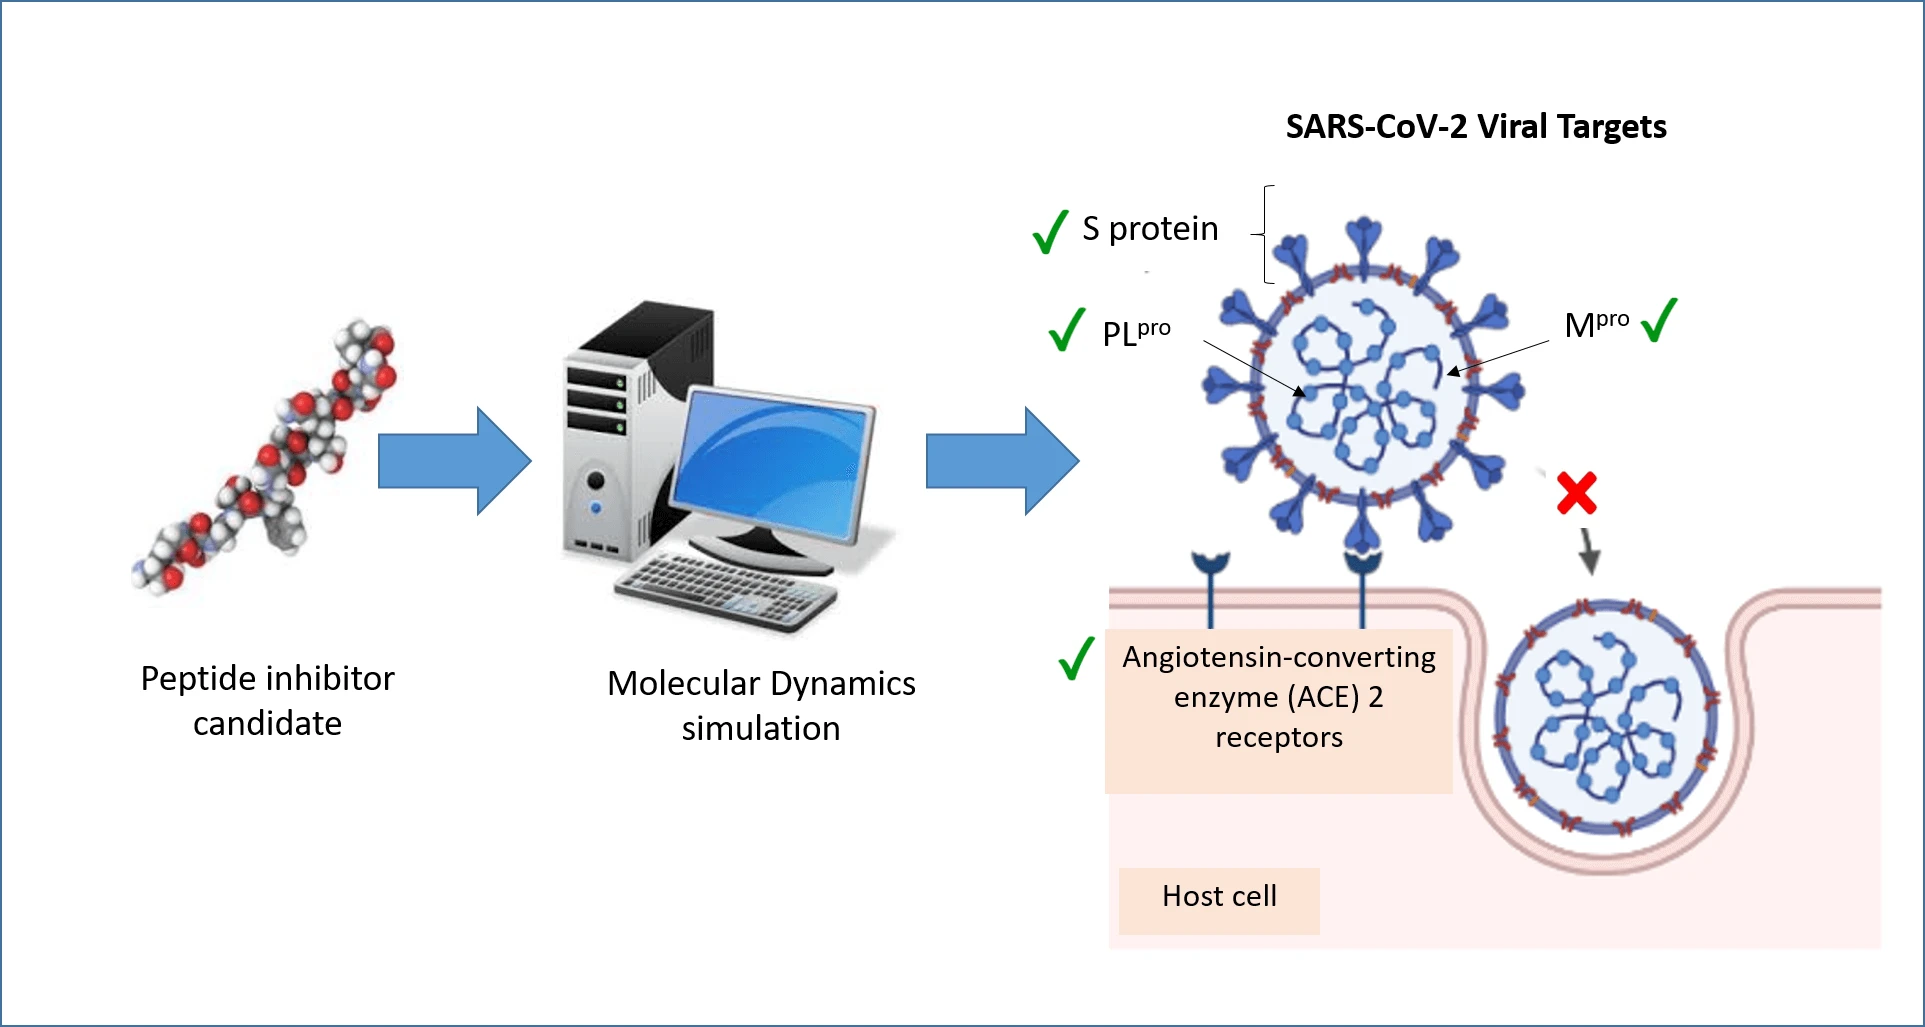 Molecular dynamics-driven exploration of peptides targeting SARS-CoV-2, with special attention on ACE2, S protein, M<sup>pro</sup>, and PL<sup>pro</sup>: A review